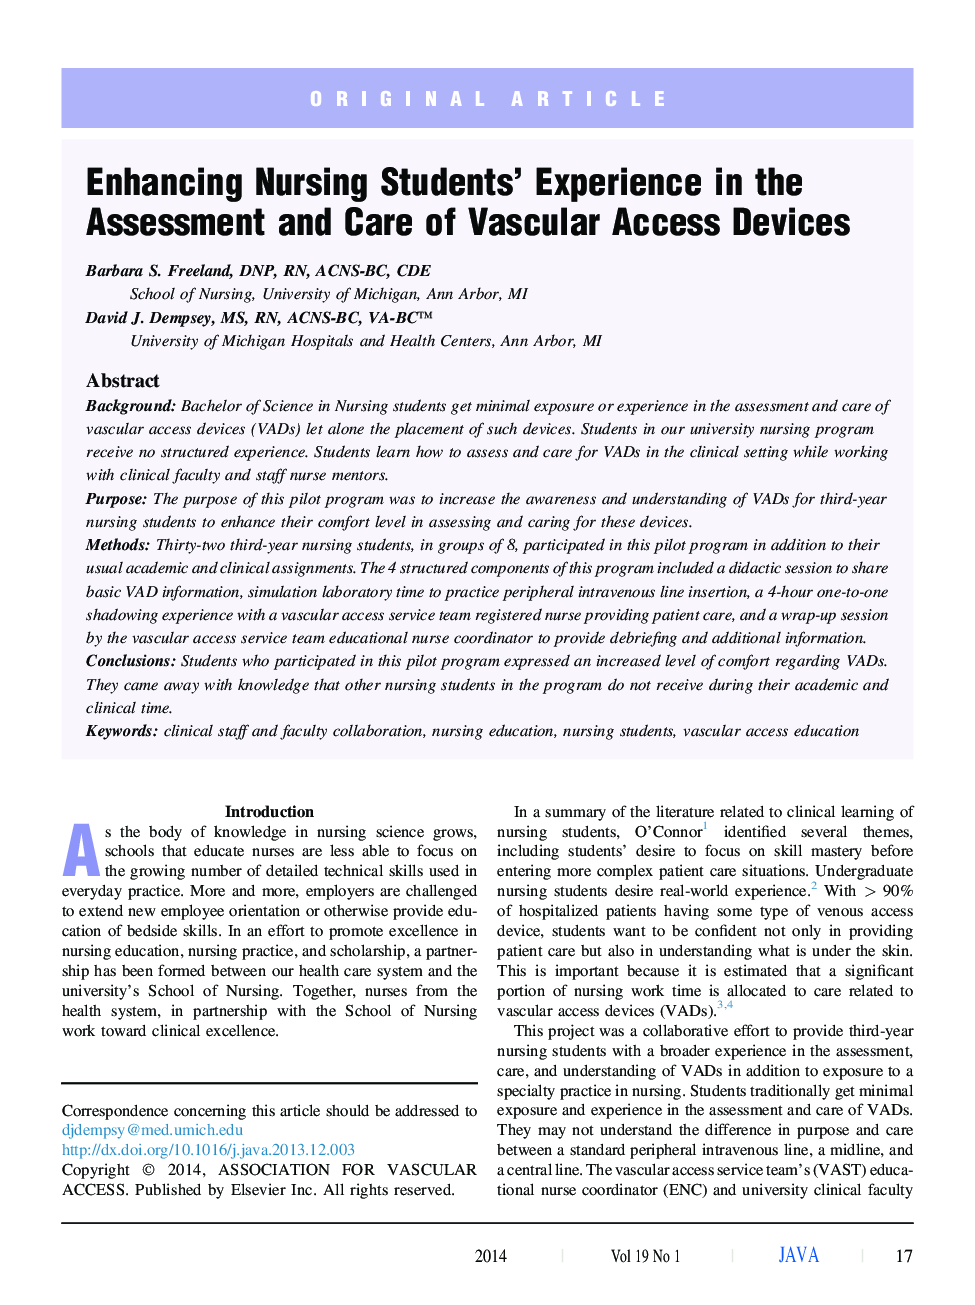 Enhancing Nursing Students' Experience in the Assessment and Care of Vascular Access Devices